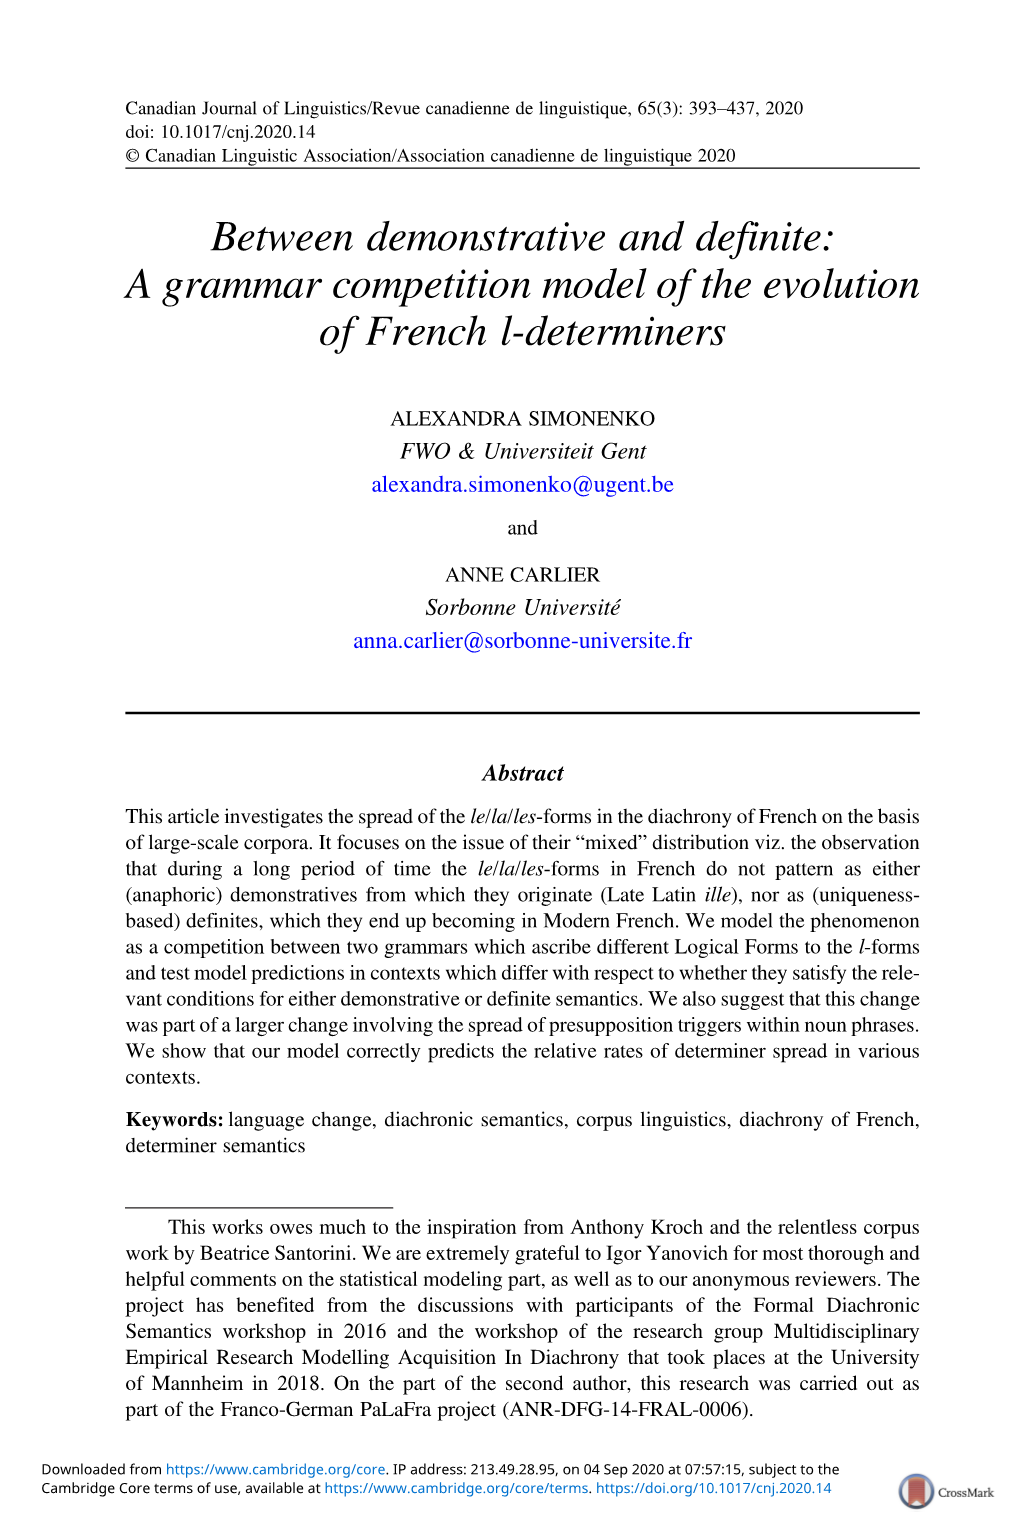 Between Demonstrative and Definite: a Grammar Competition Model of the Evolution of French L-Determiners